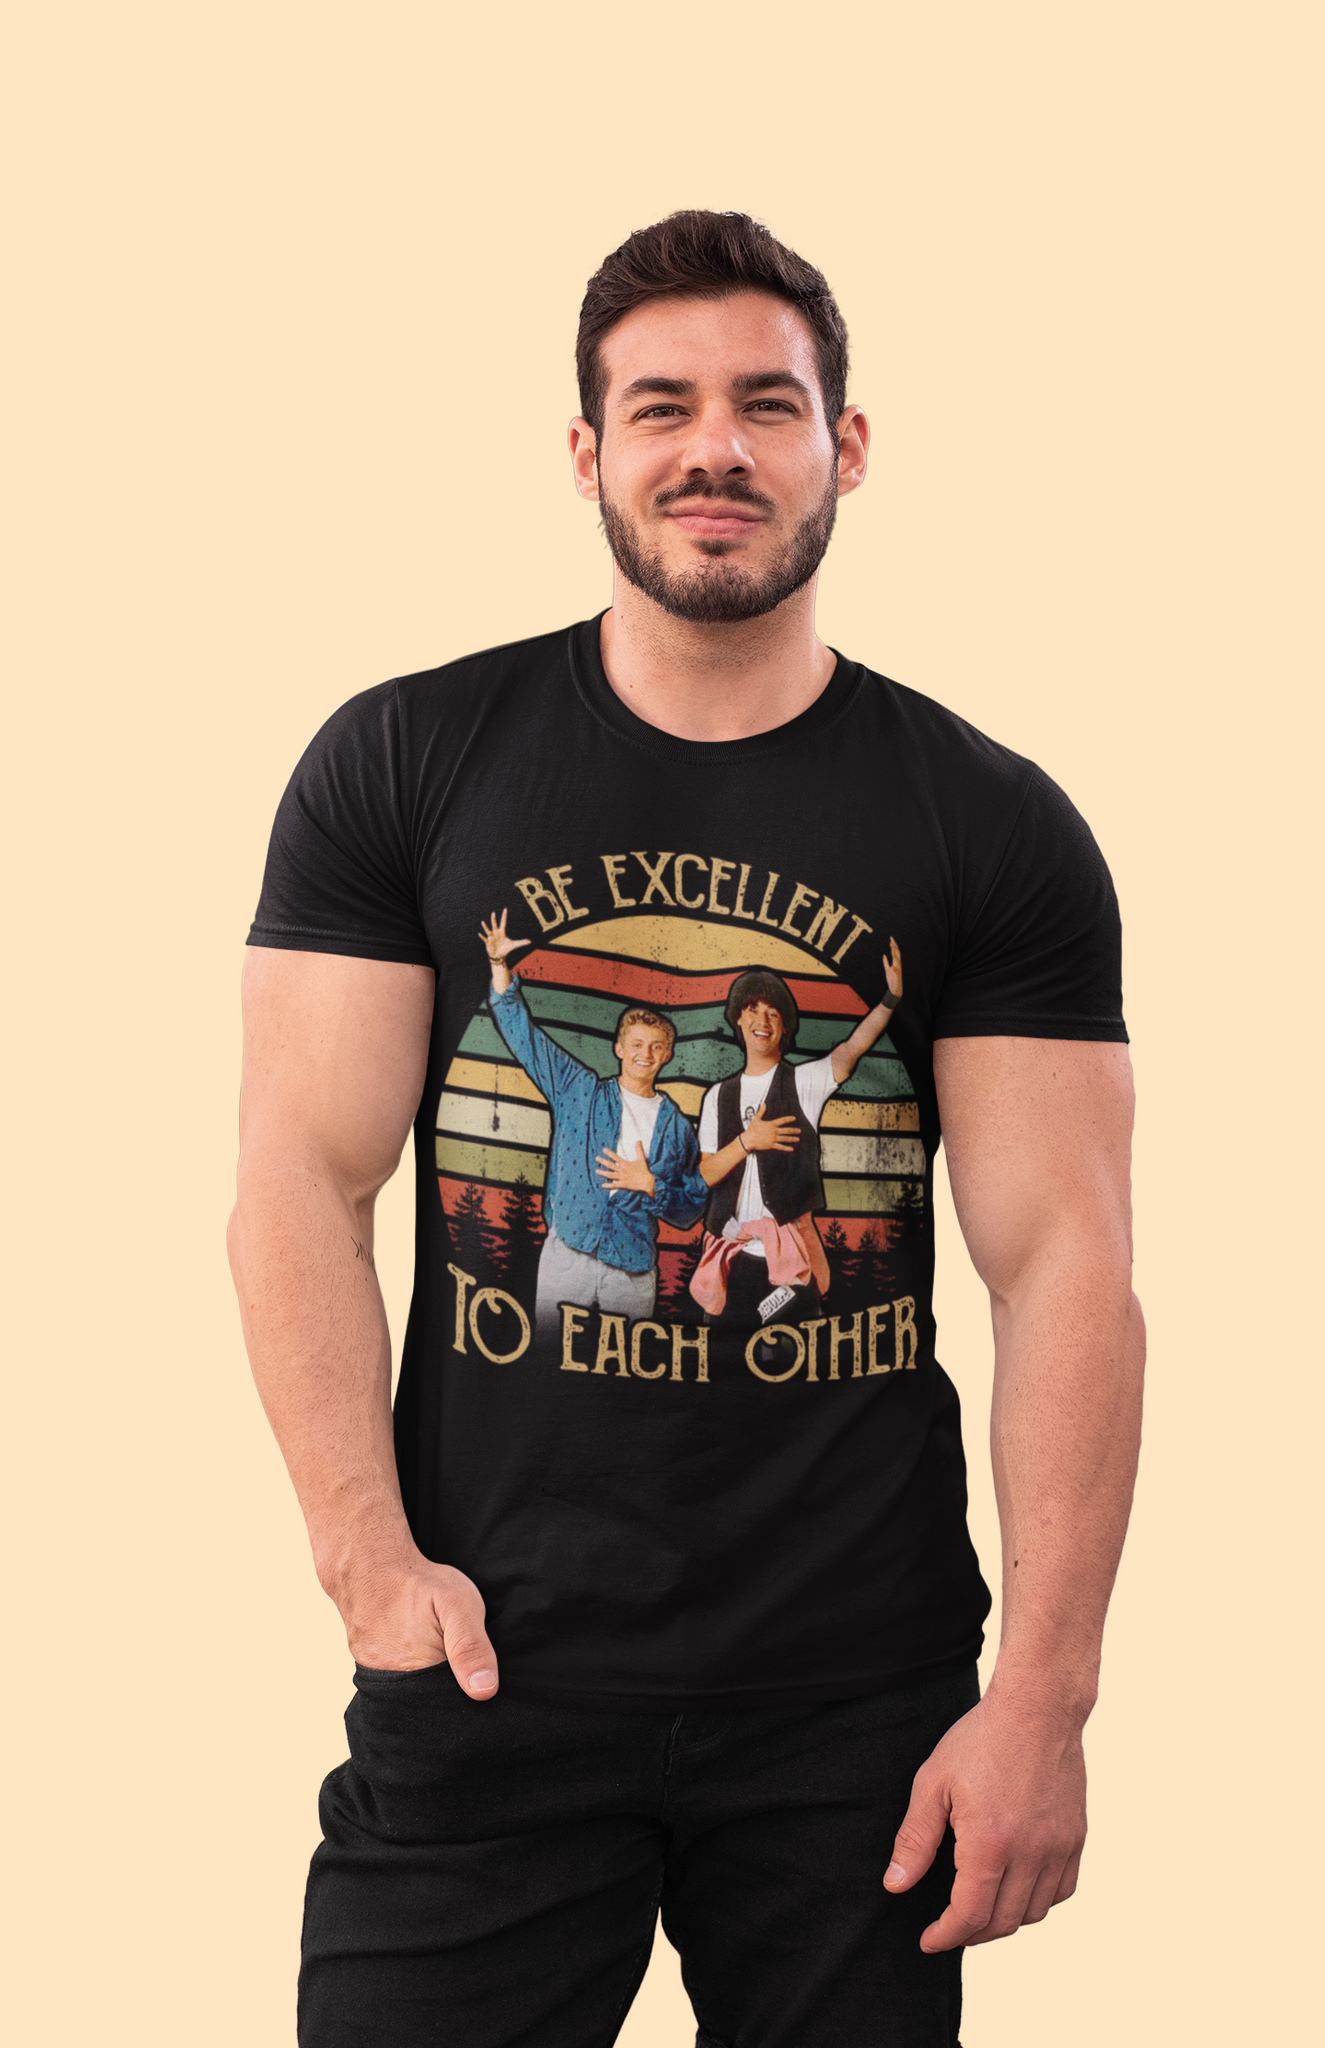 Bill And Teds Excellent Adventure Vintage T Shirt, Bill Ted T Shirt, Be Excellent To Each Other Tshirt